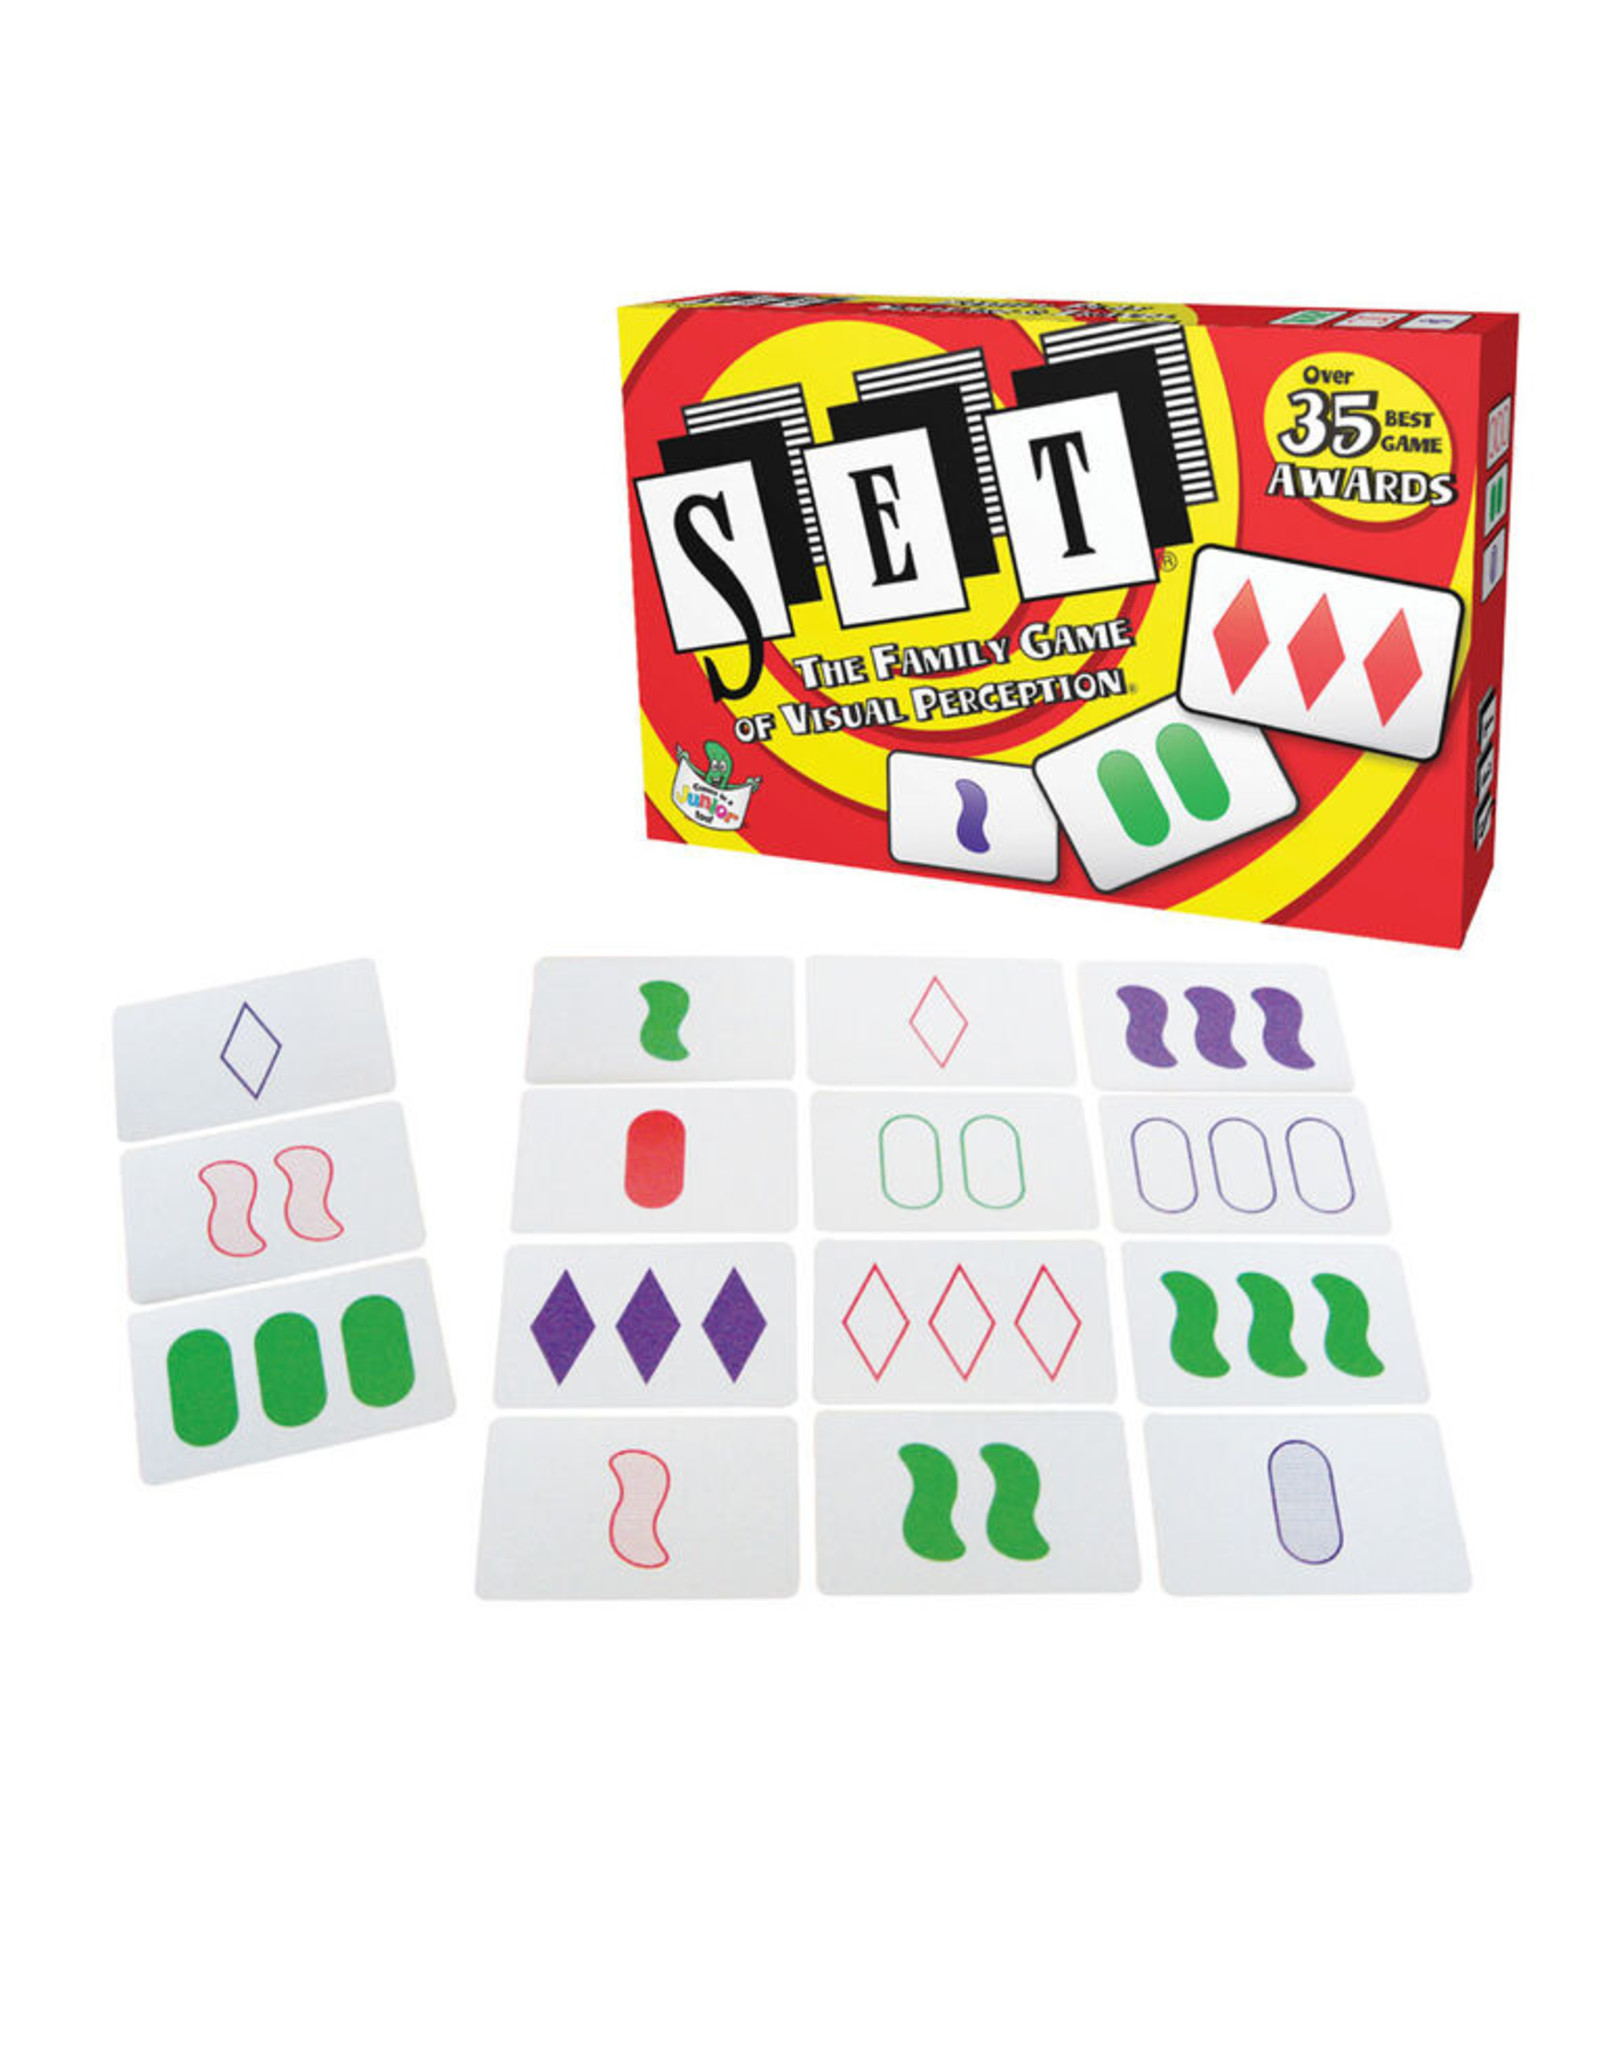 Play Monster Set - The Family Game of Visual Perception